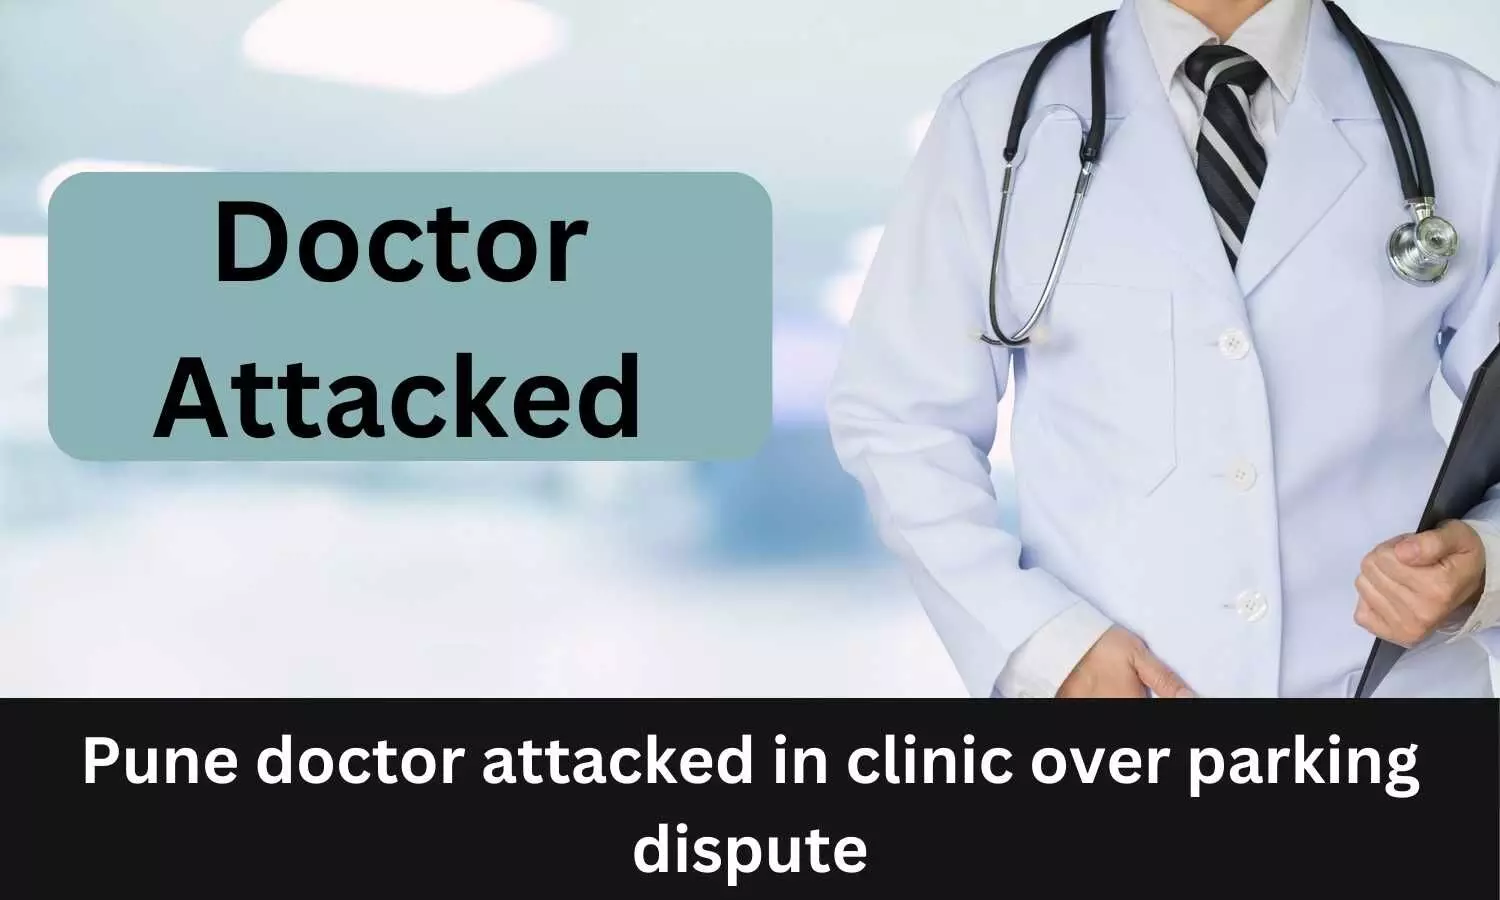 30-year-old doctor attacked in clinic over parking dispute